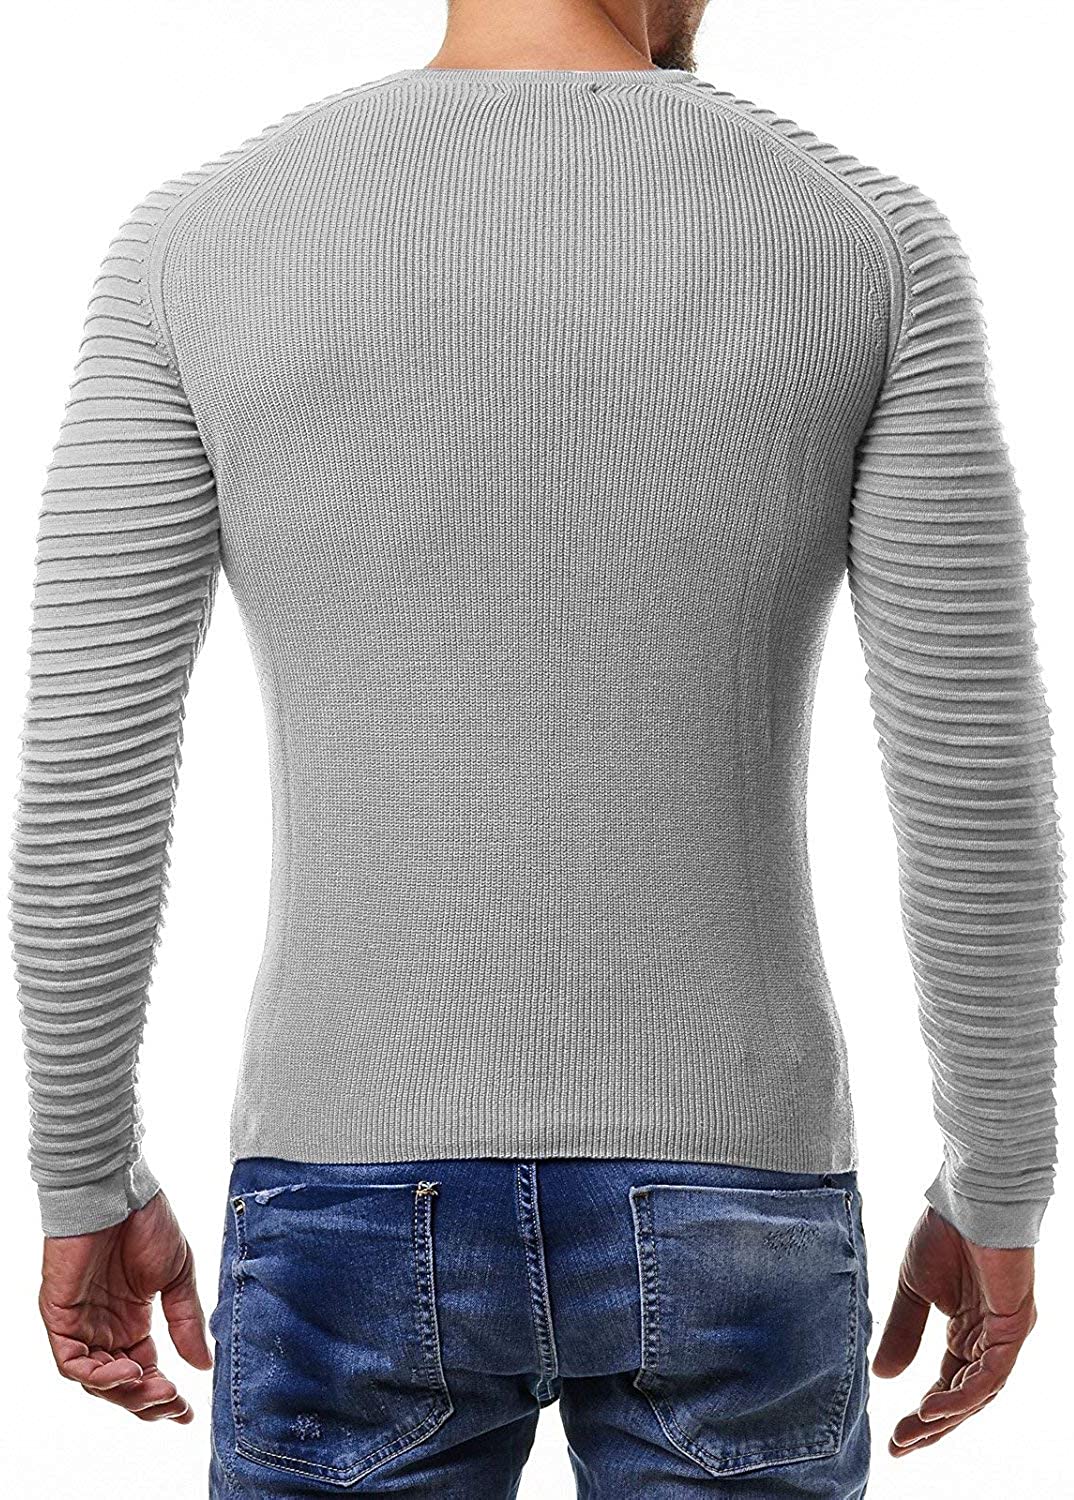 COOFANDY Men's Cable Knit Sweater Stripe Crew Neck Long Sleeve Pullover ...